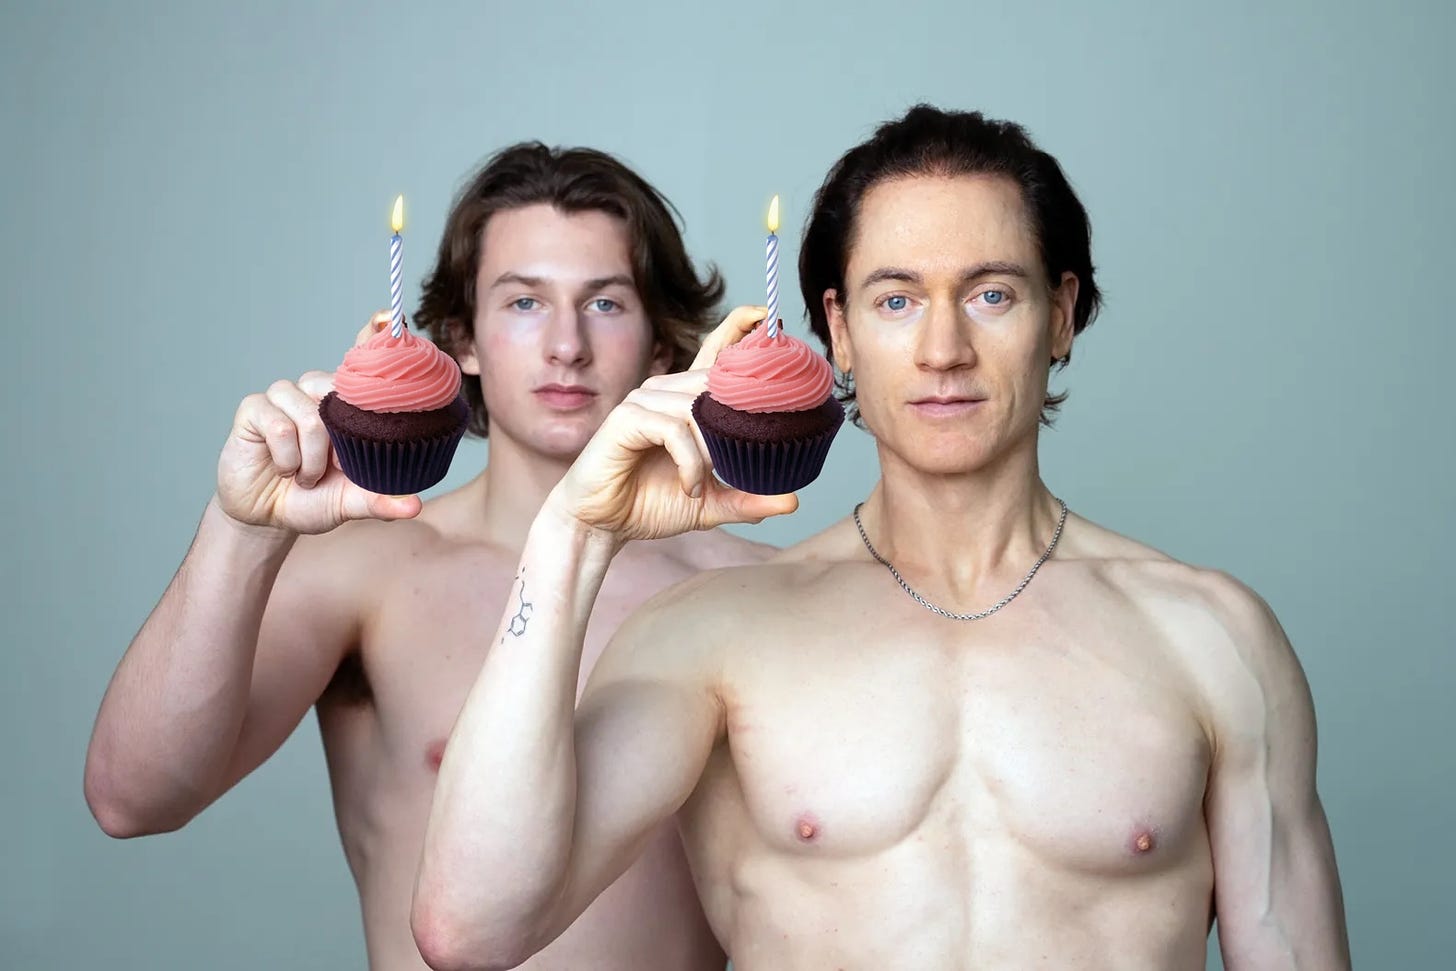 It's Bryan Johnson, of course! This is the image he took shirtless with his son standing behind him. In the original, they're holding up little vials of blood (I believe this was an article about their swapping), but I've covered those with two chocolate cupcakes with pink frosting.